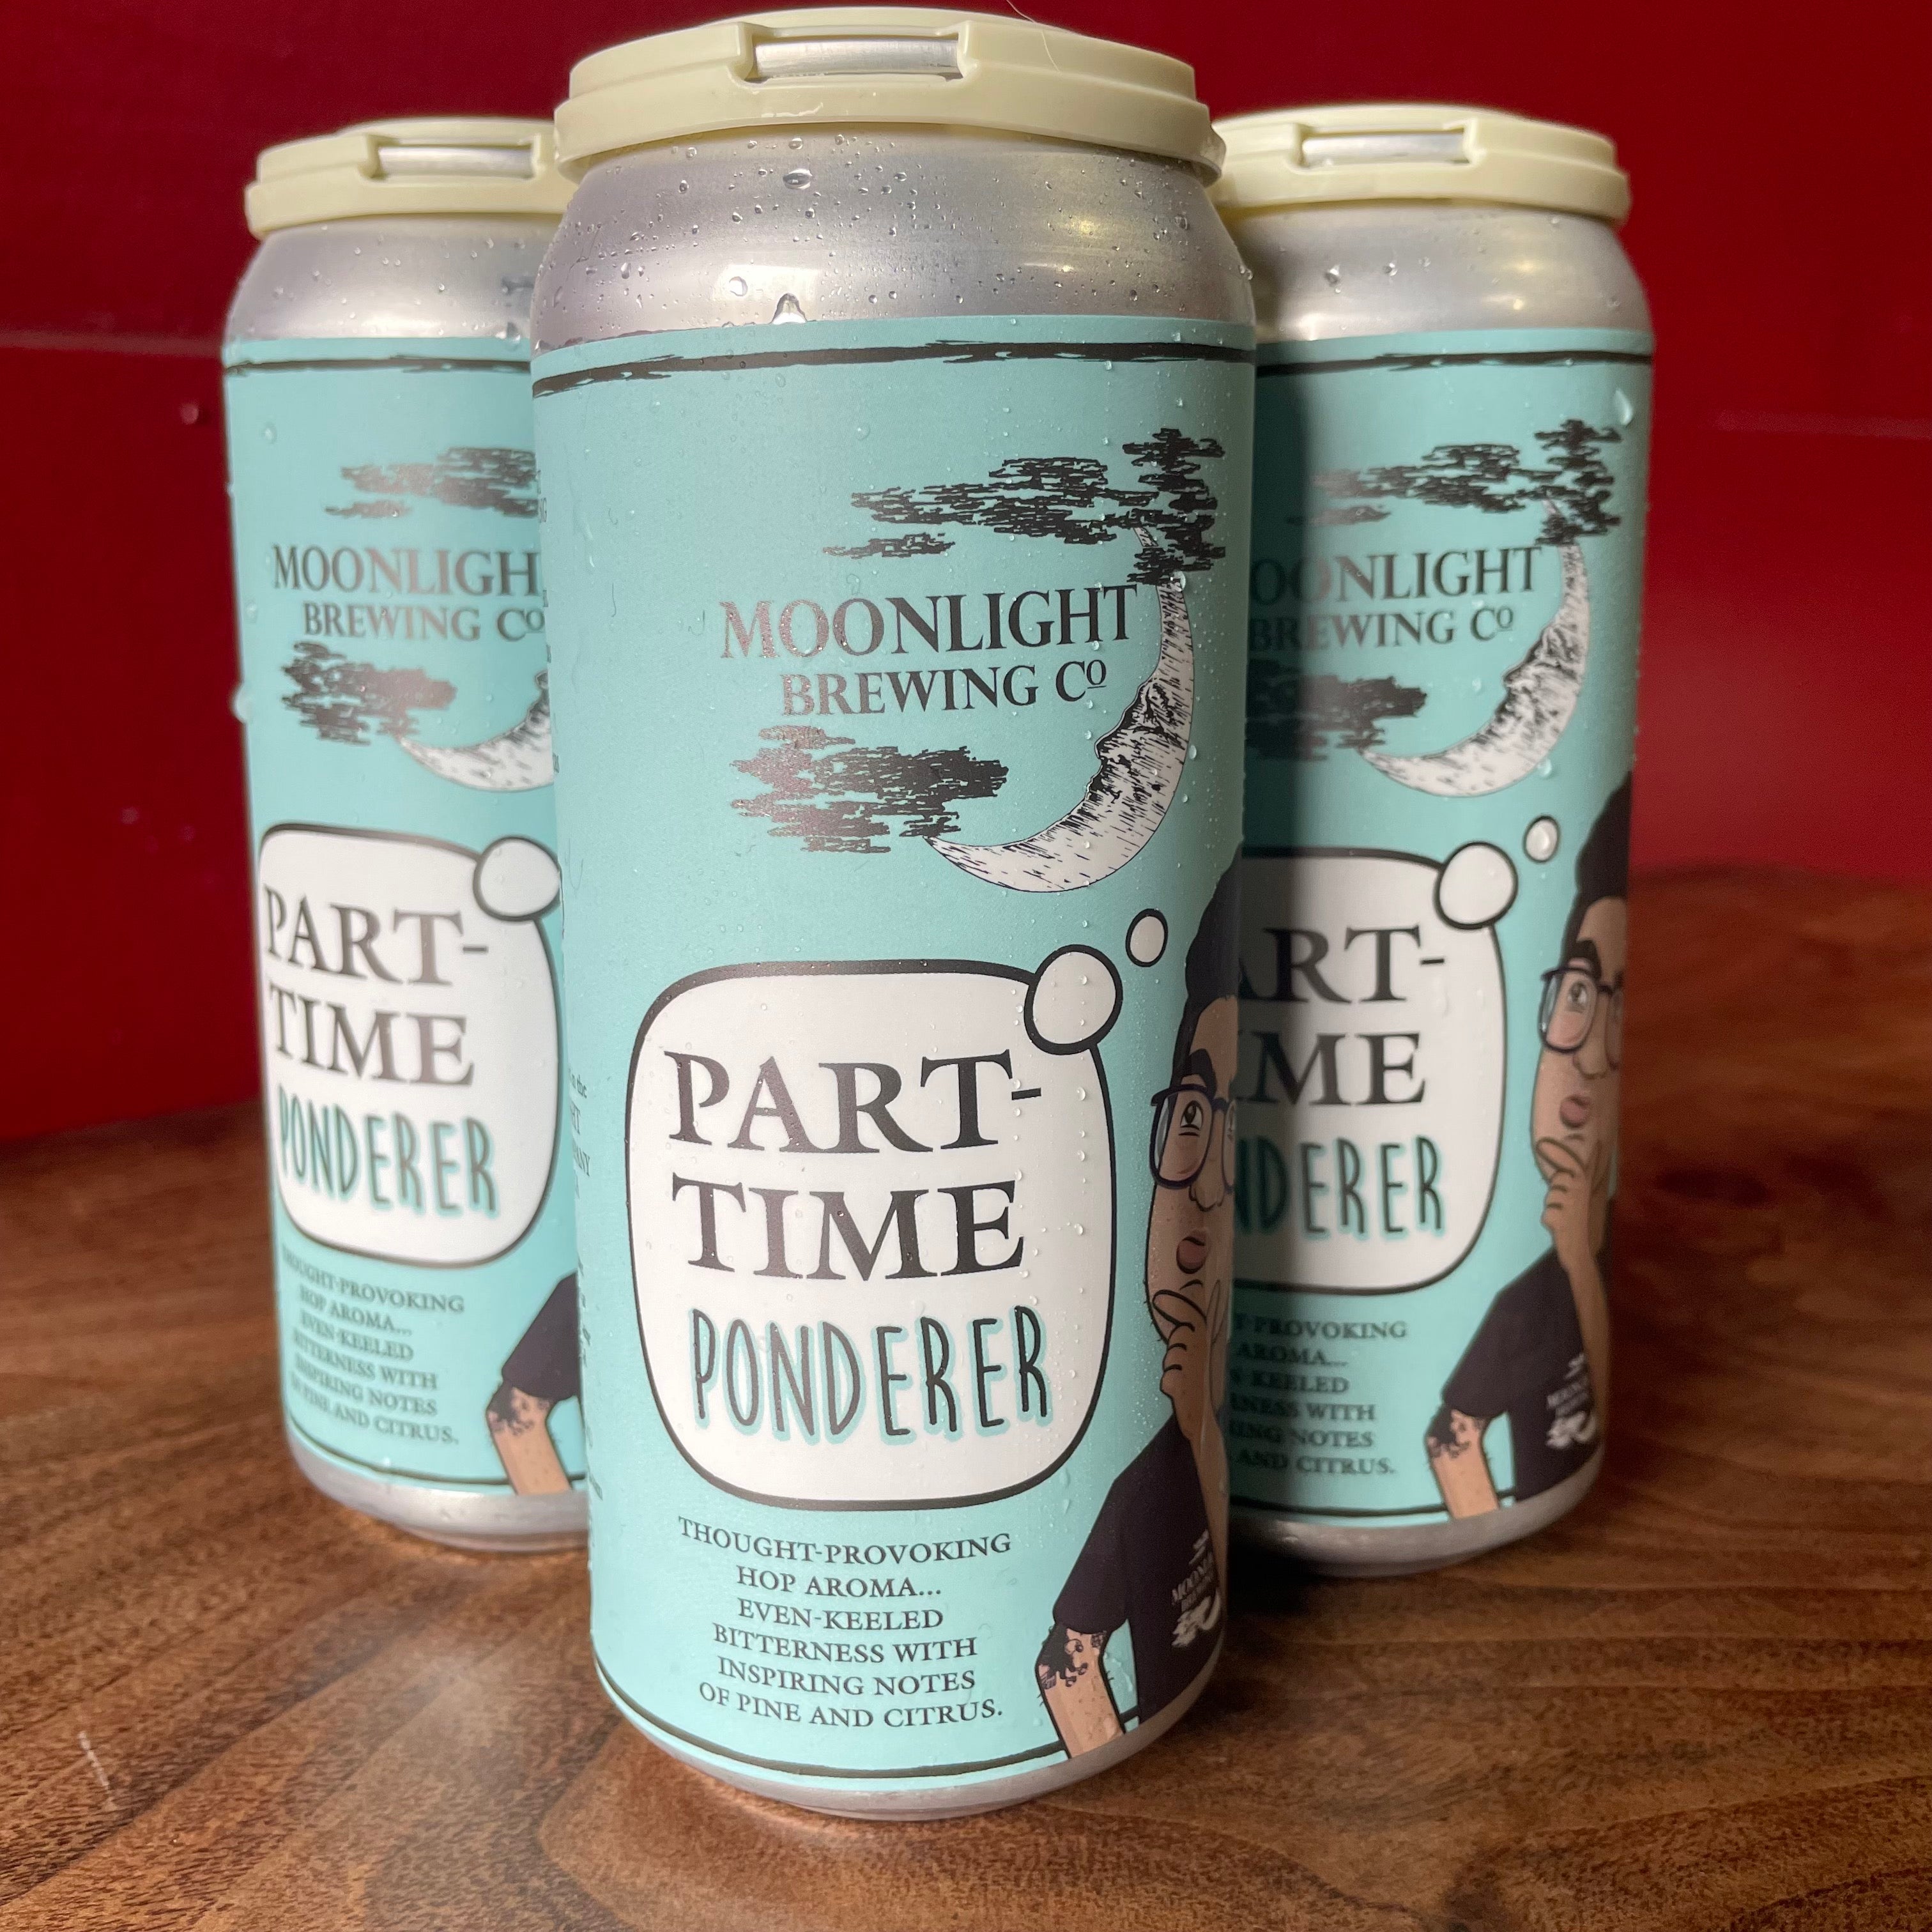 4-Pack of Part-Time Ponderer IPA from Moonlight Brewing Company